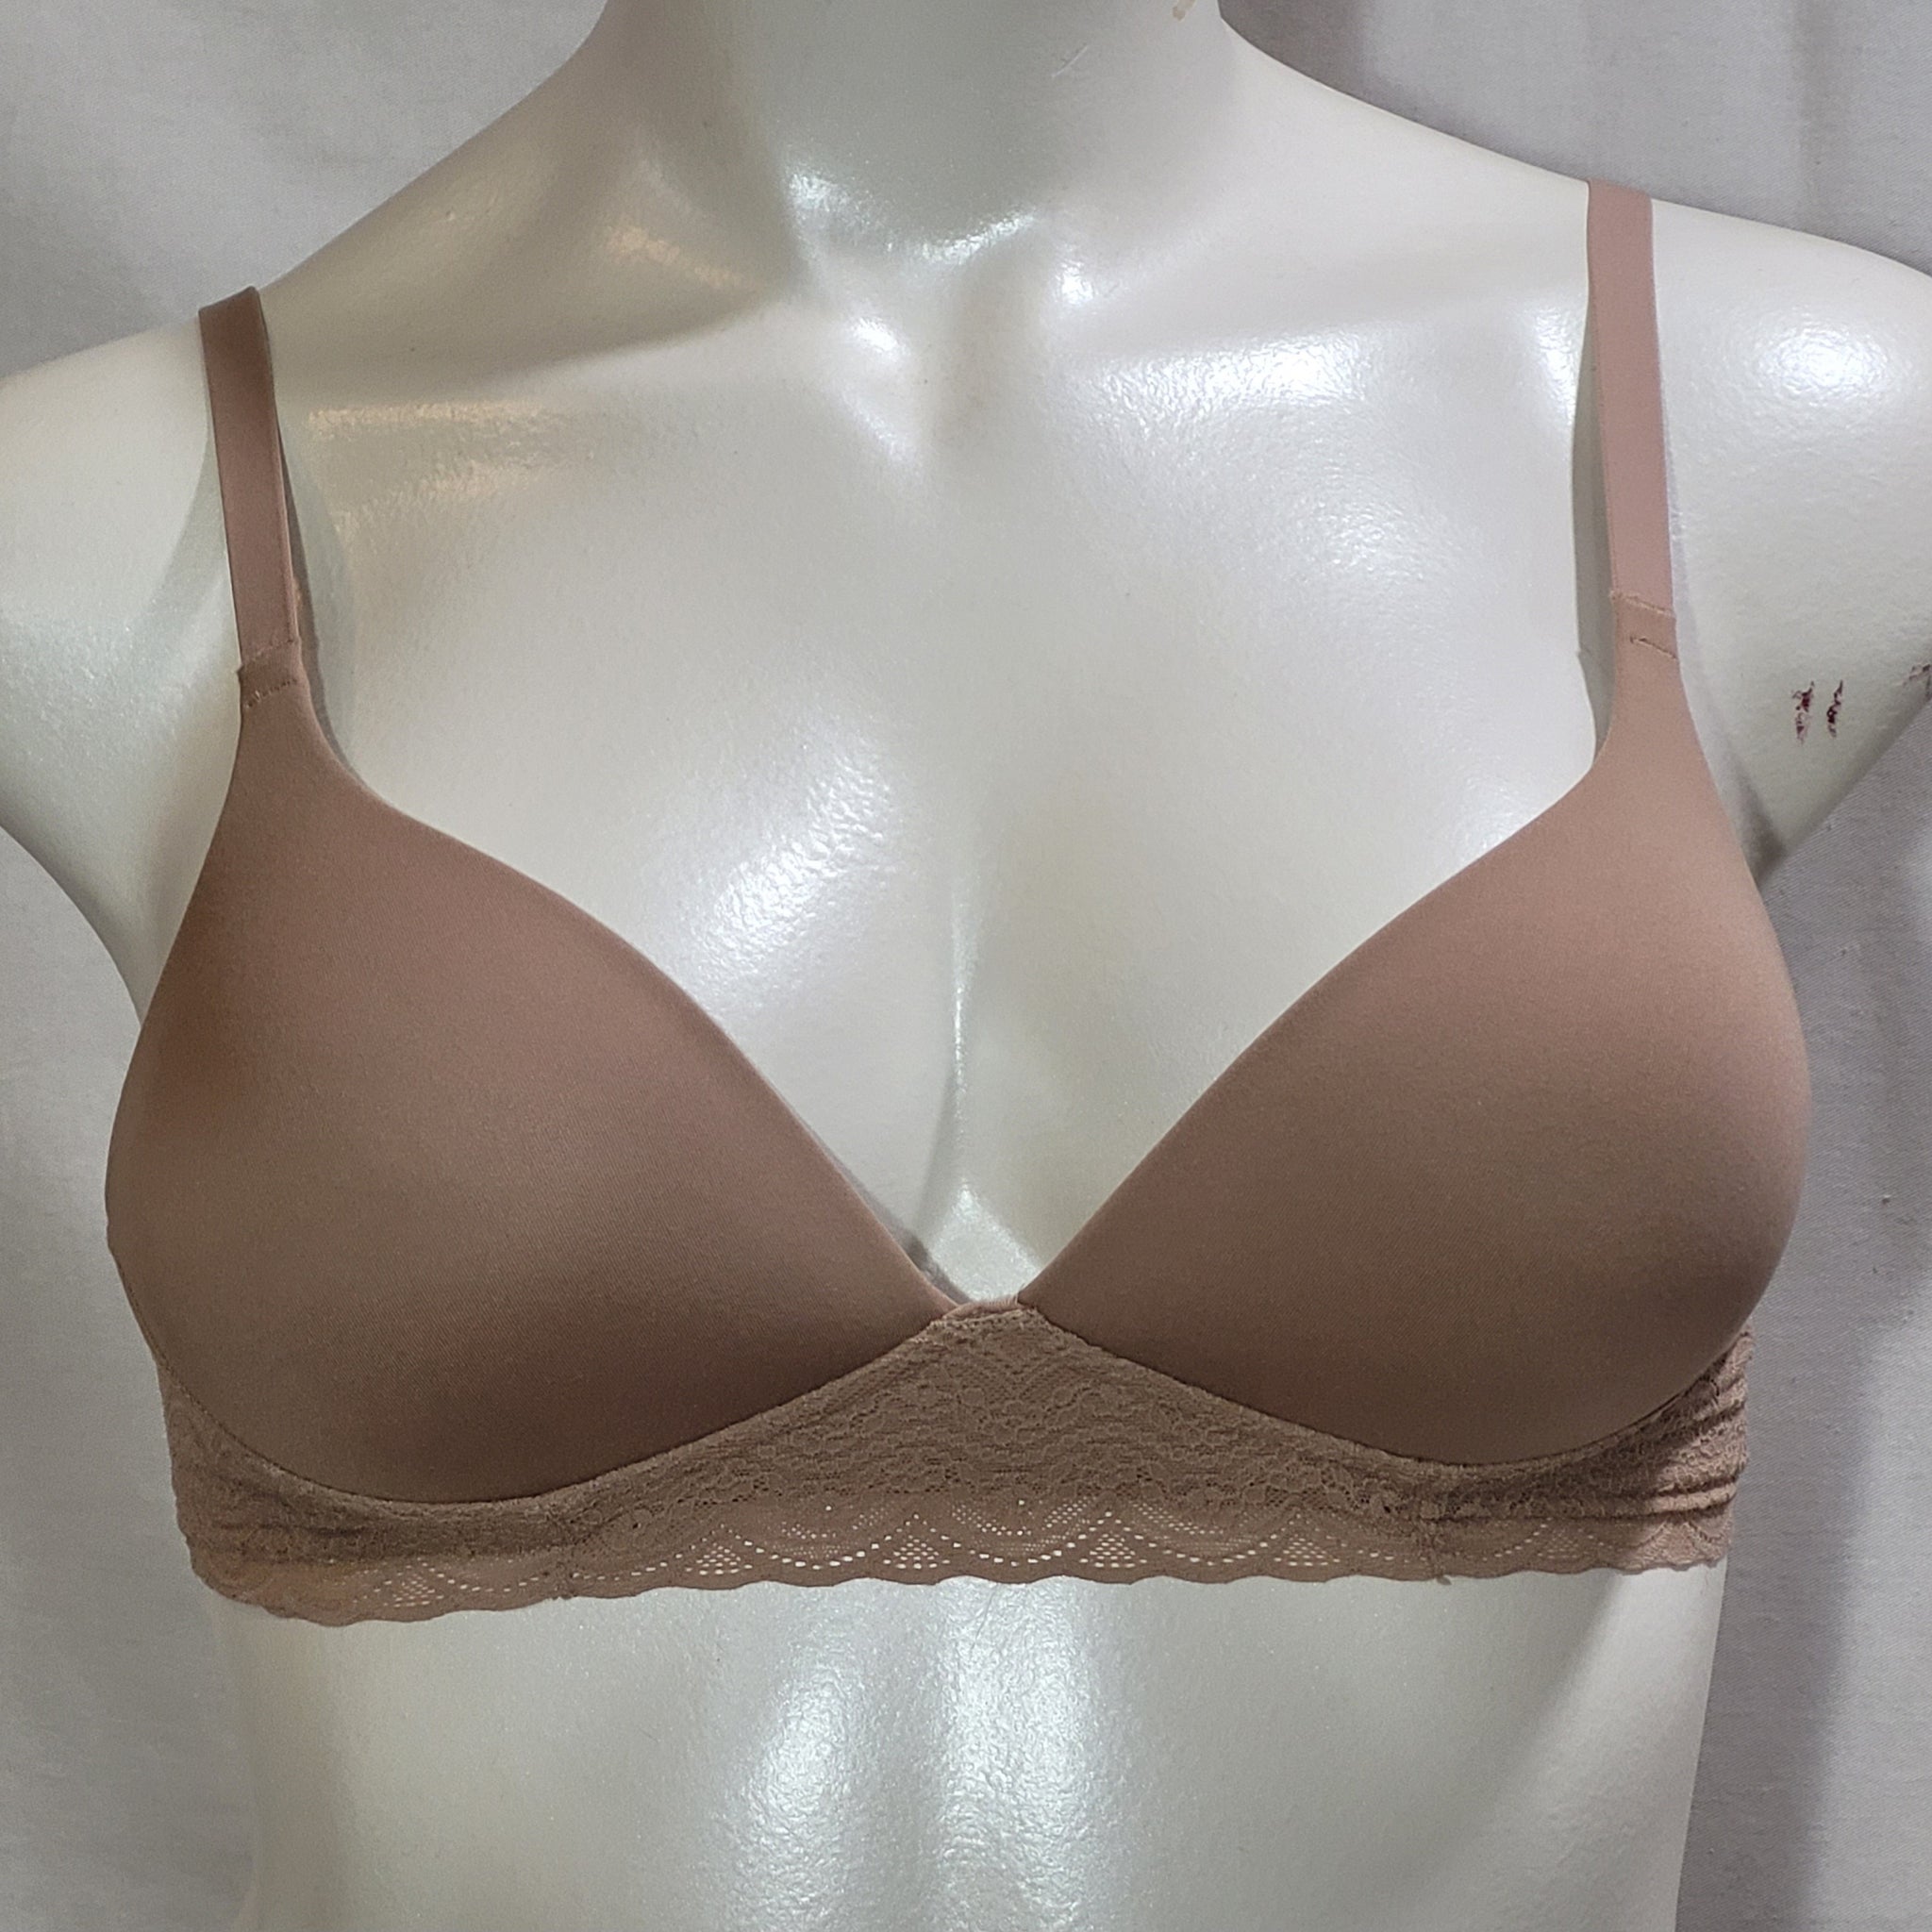 Warner's RO5691 Simply Perfect Supersoft Lace Wirefree Bra